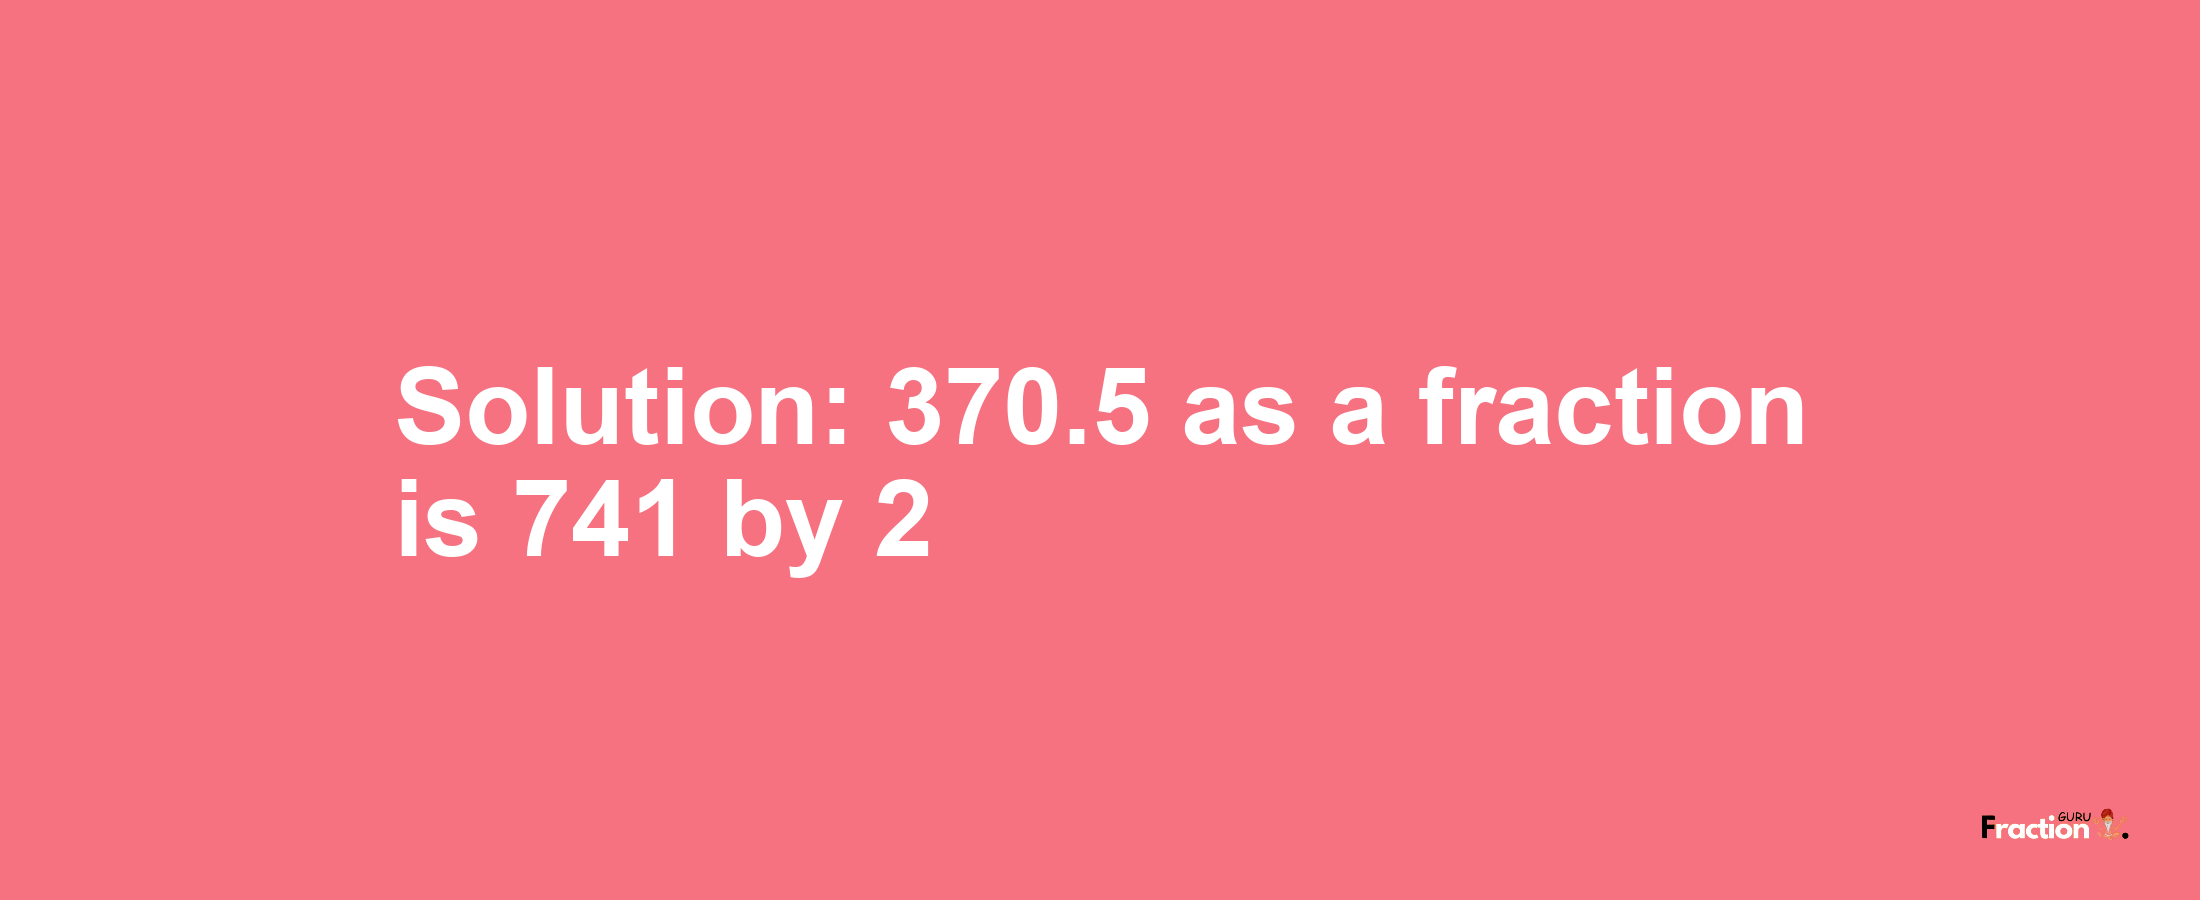 Solution:370.5 as a fraction is 741/2